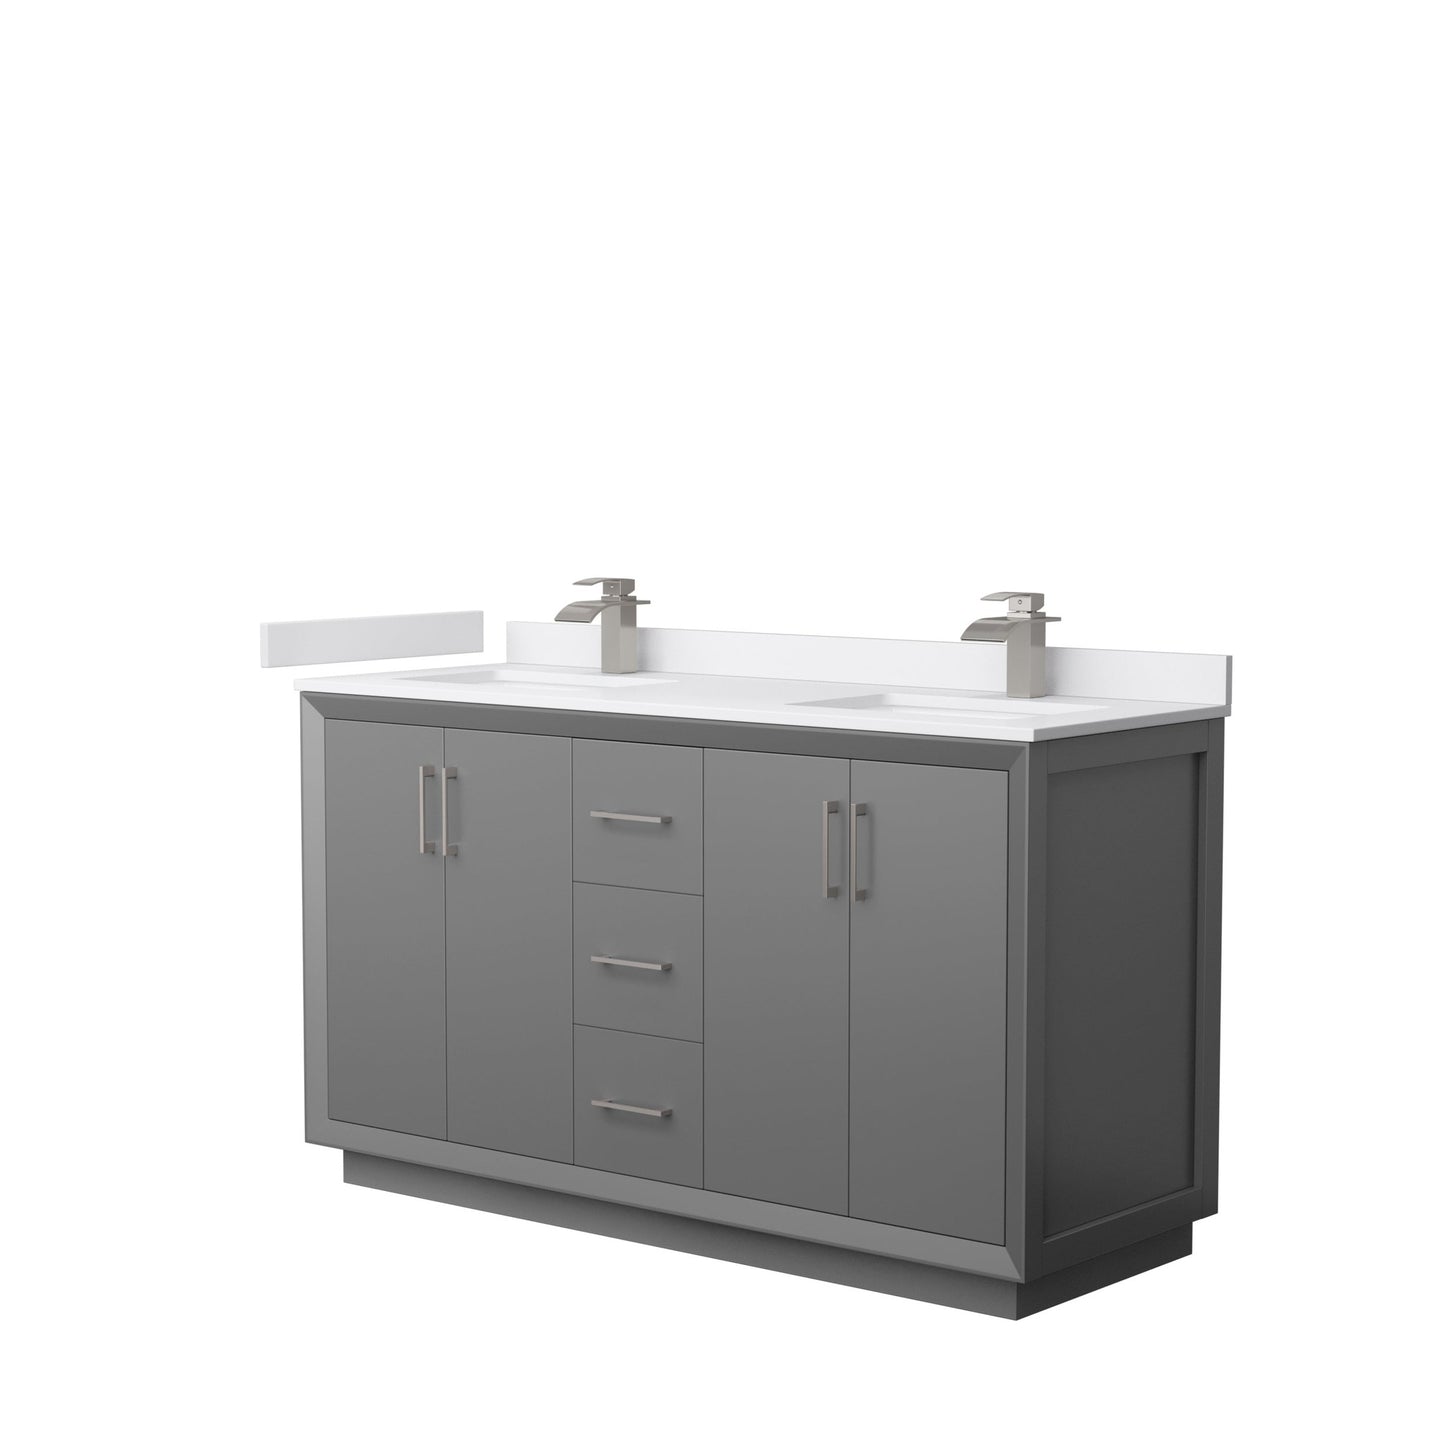 Wyndham Collection Strada 60" Double Bathroom Vanity in Dark Gray, White Cultured Marble Countertop, Undermount Square Sink, Brushed Nickel Trim